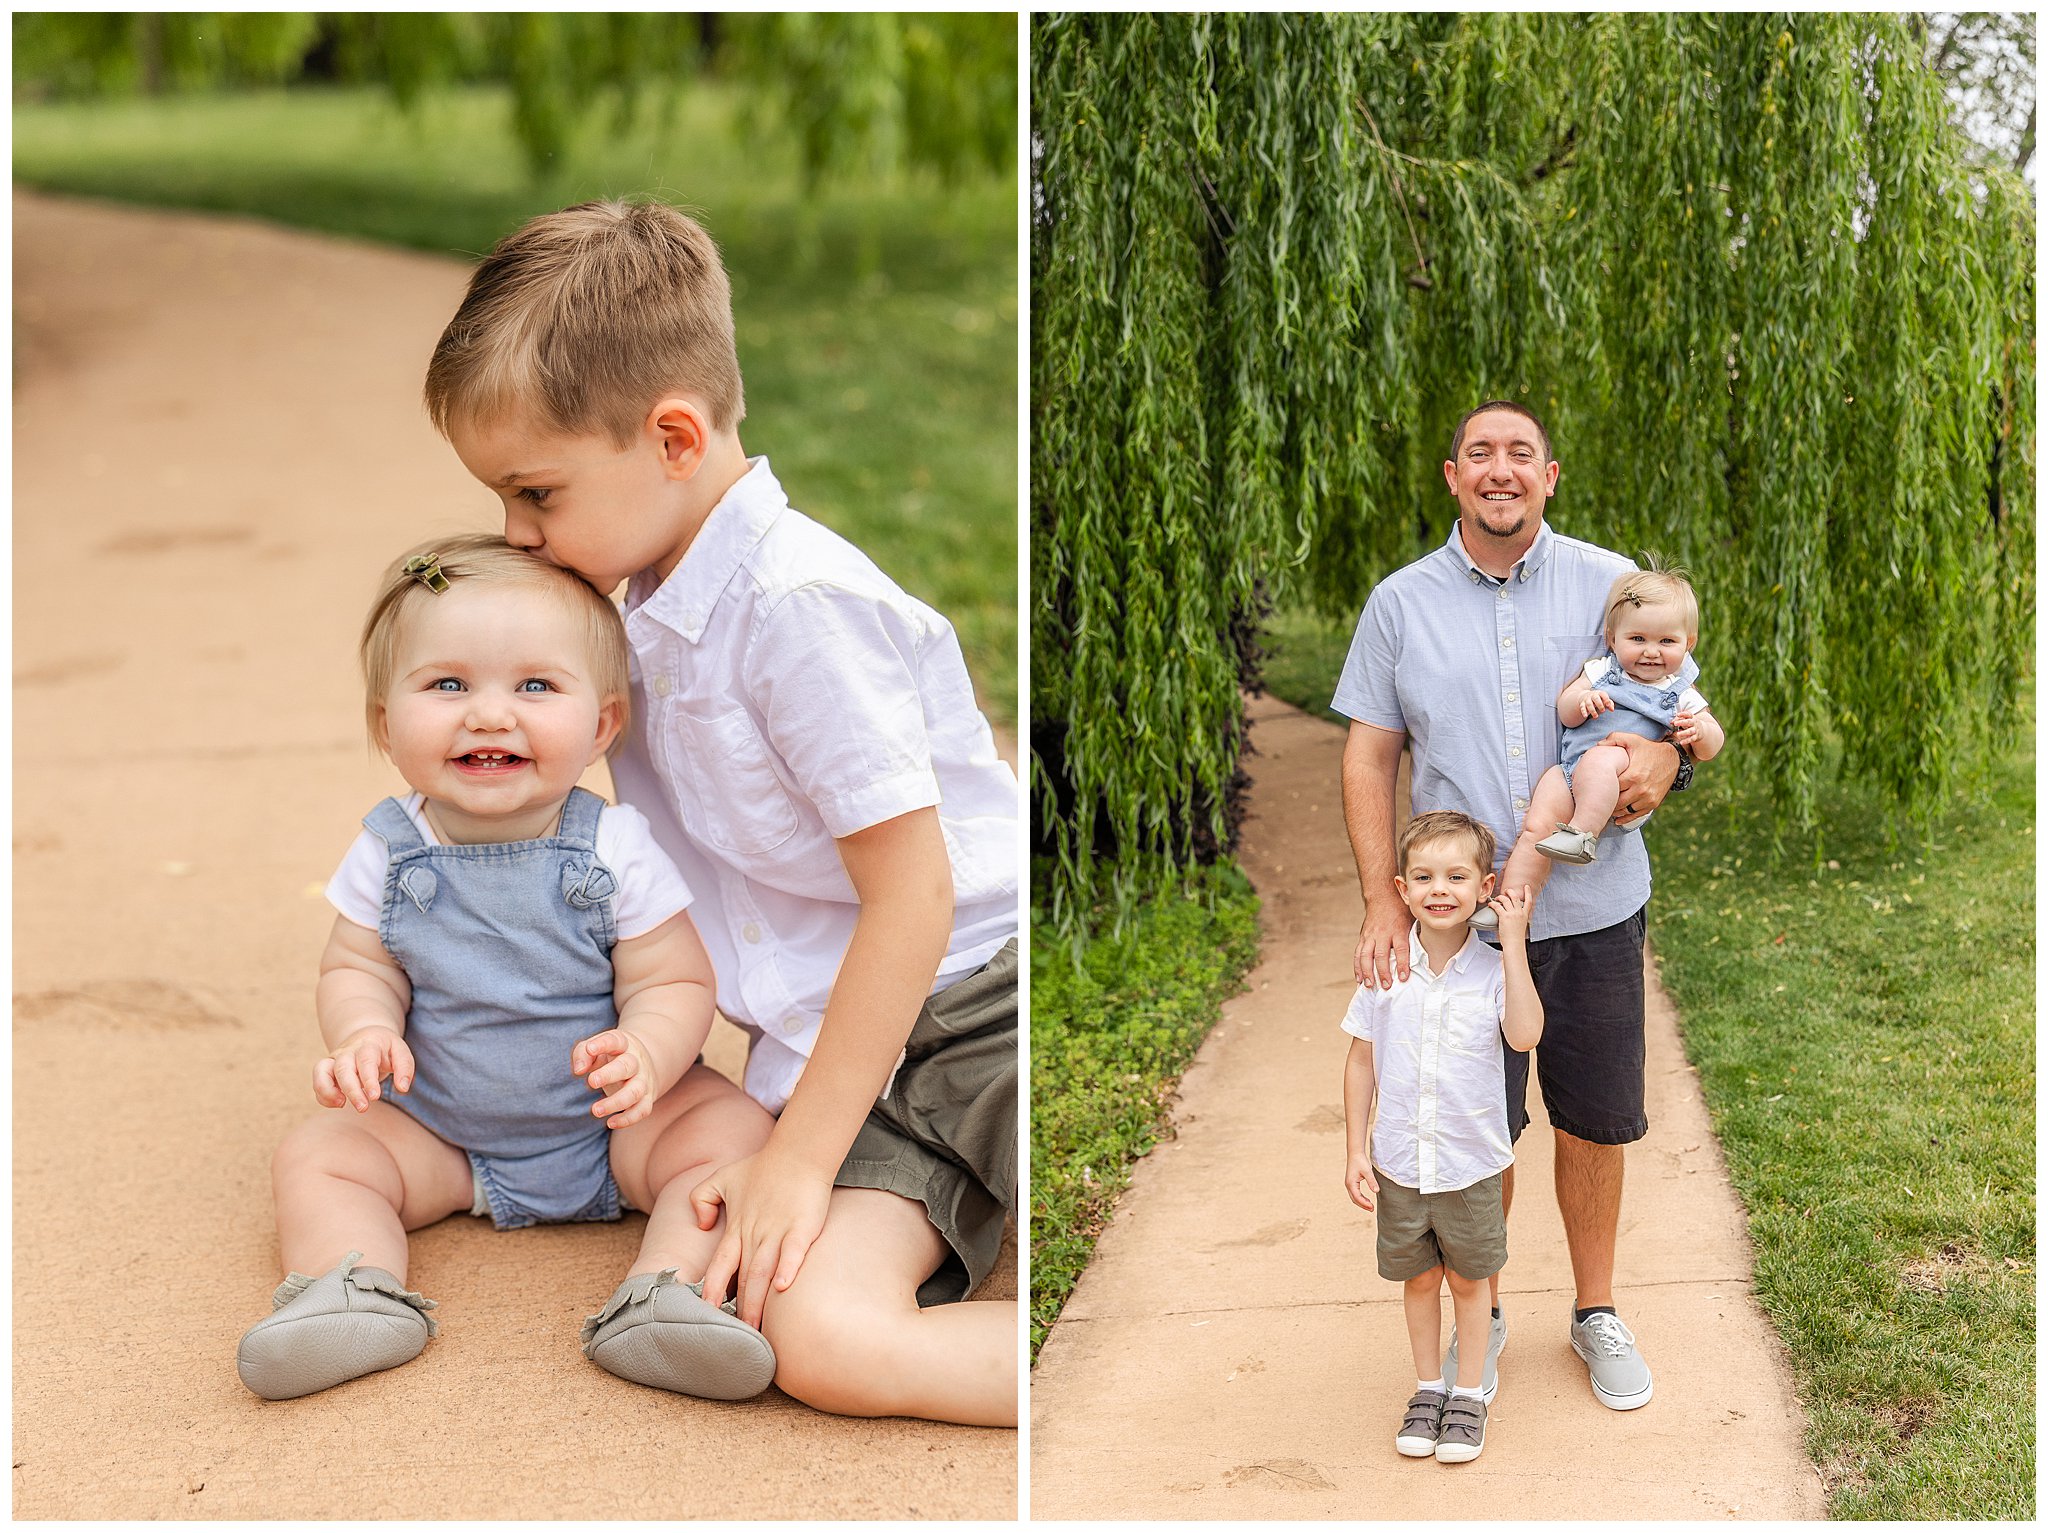 White Ranch Events Chico CA Family Session Willow Tree Pond Brother Sister Love May Spring Blue White Black,